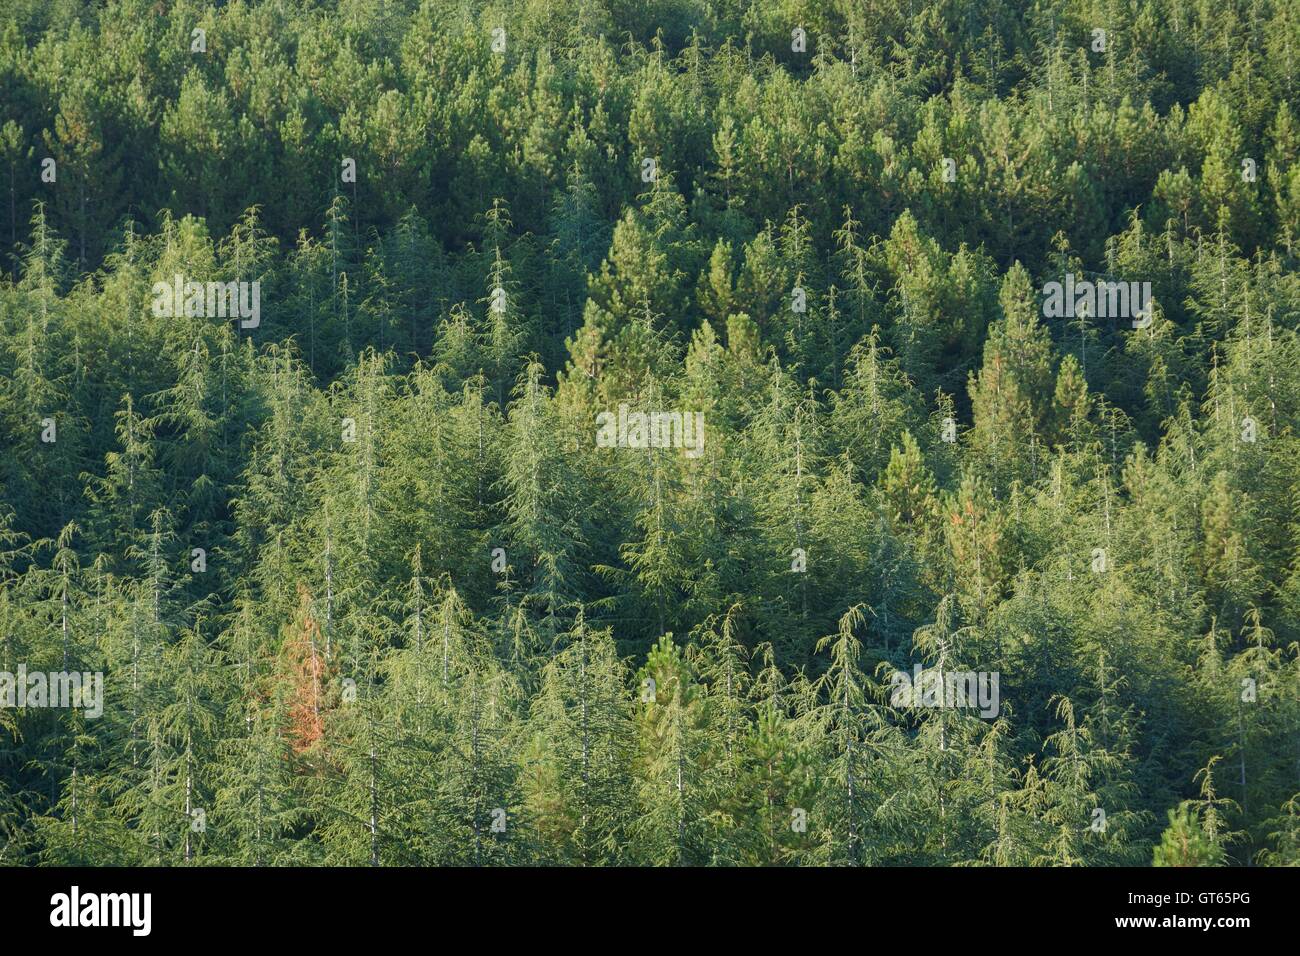 tree lone yellowed in the middle of an expanse of green trees.concept Stock Photo